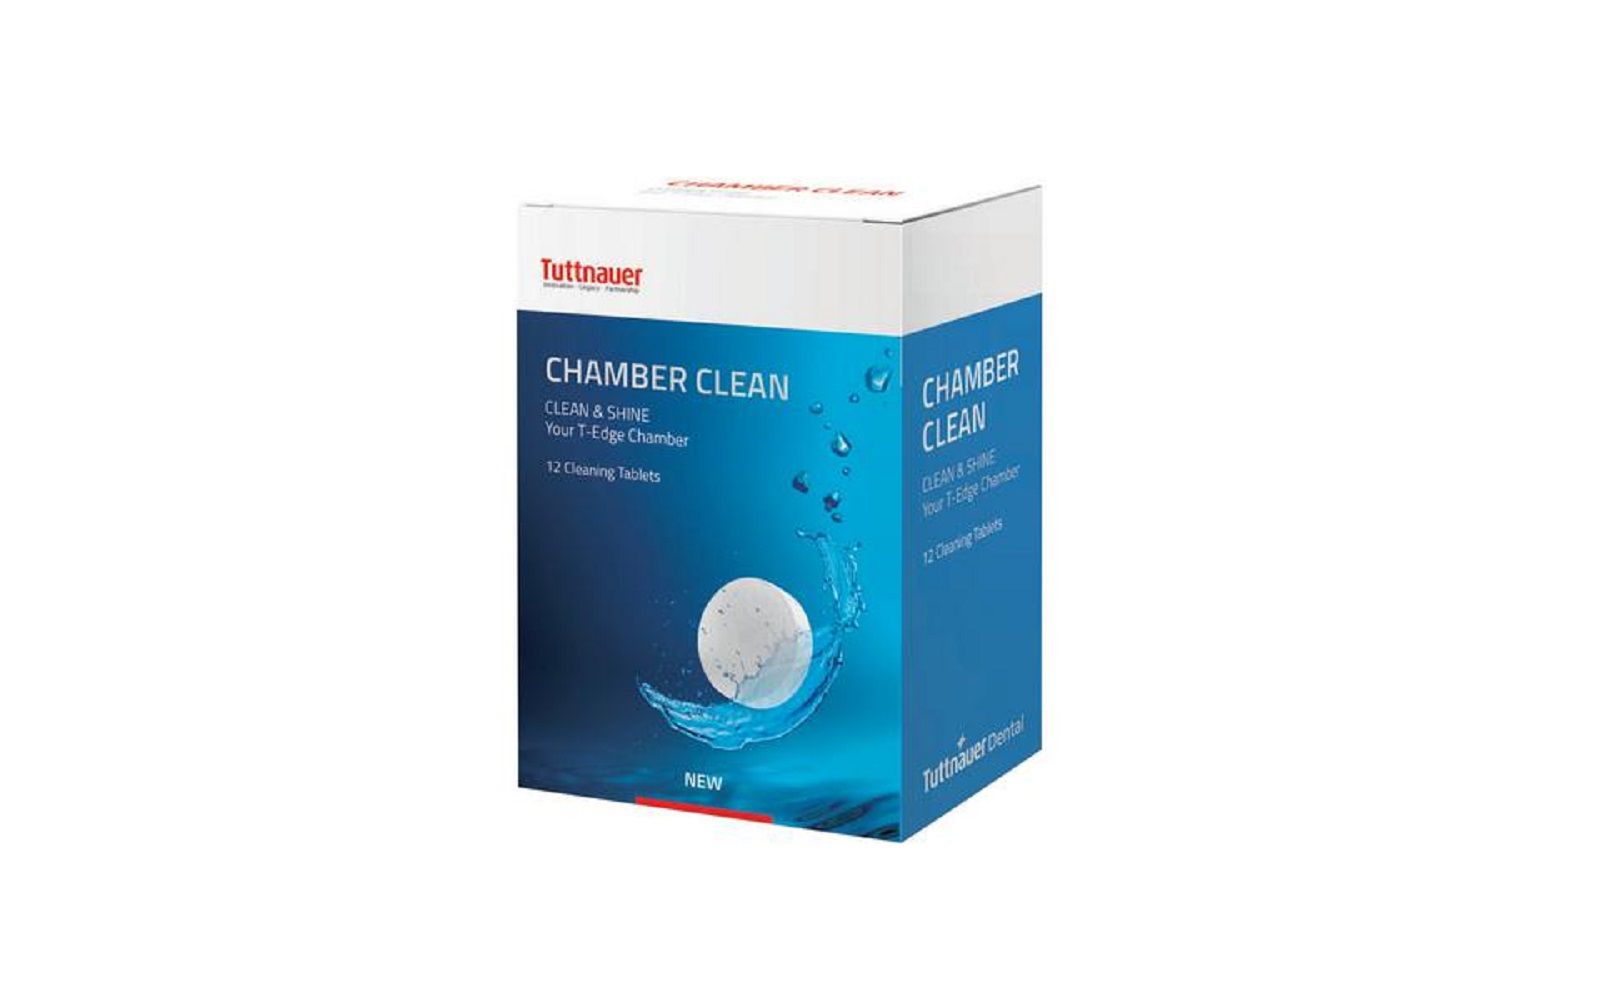 Chamber clean tablets for t-edge autoclave, 12/pkg